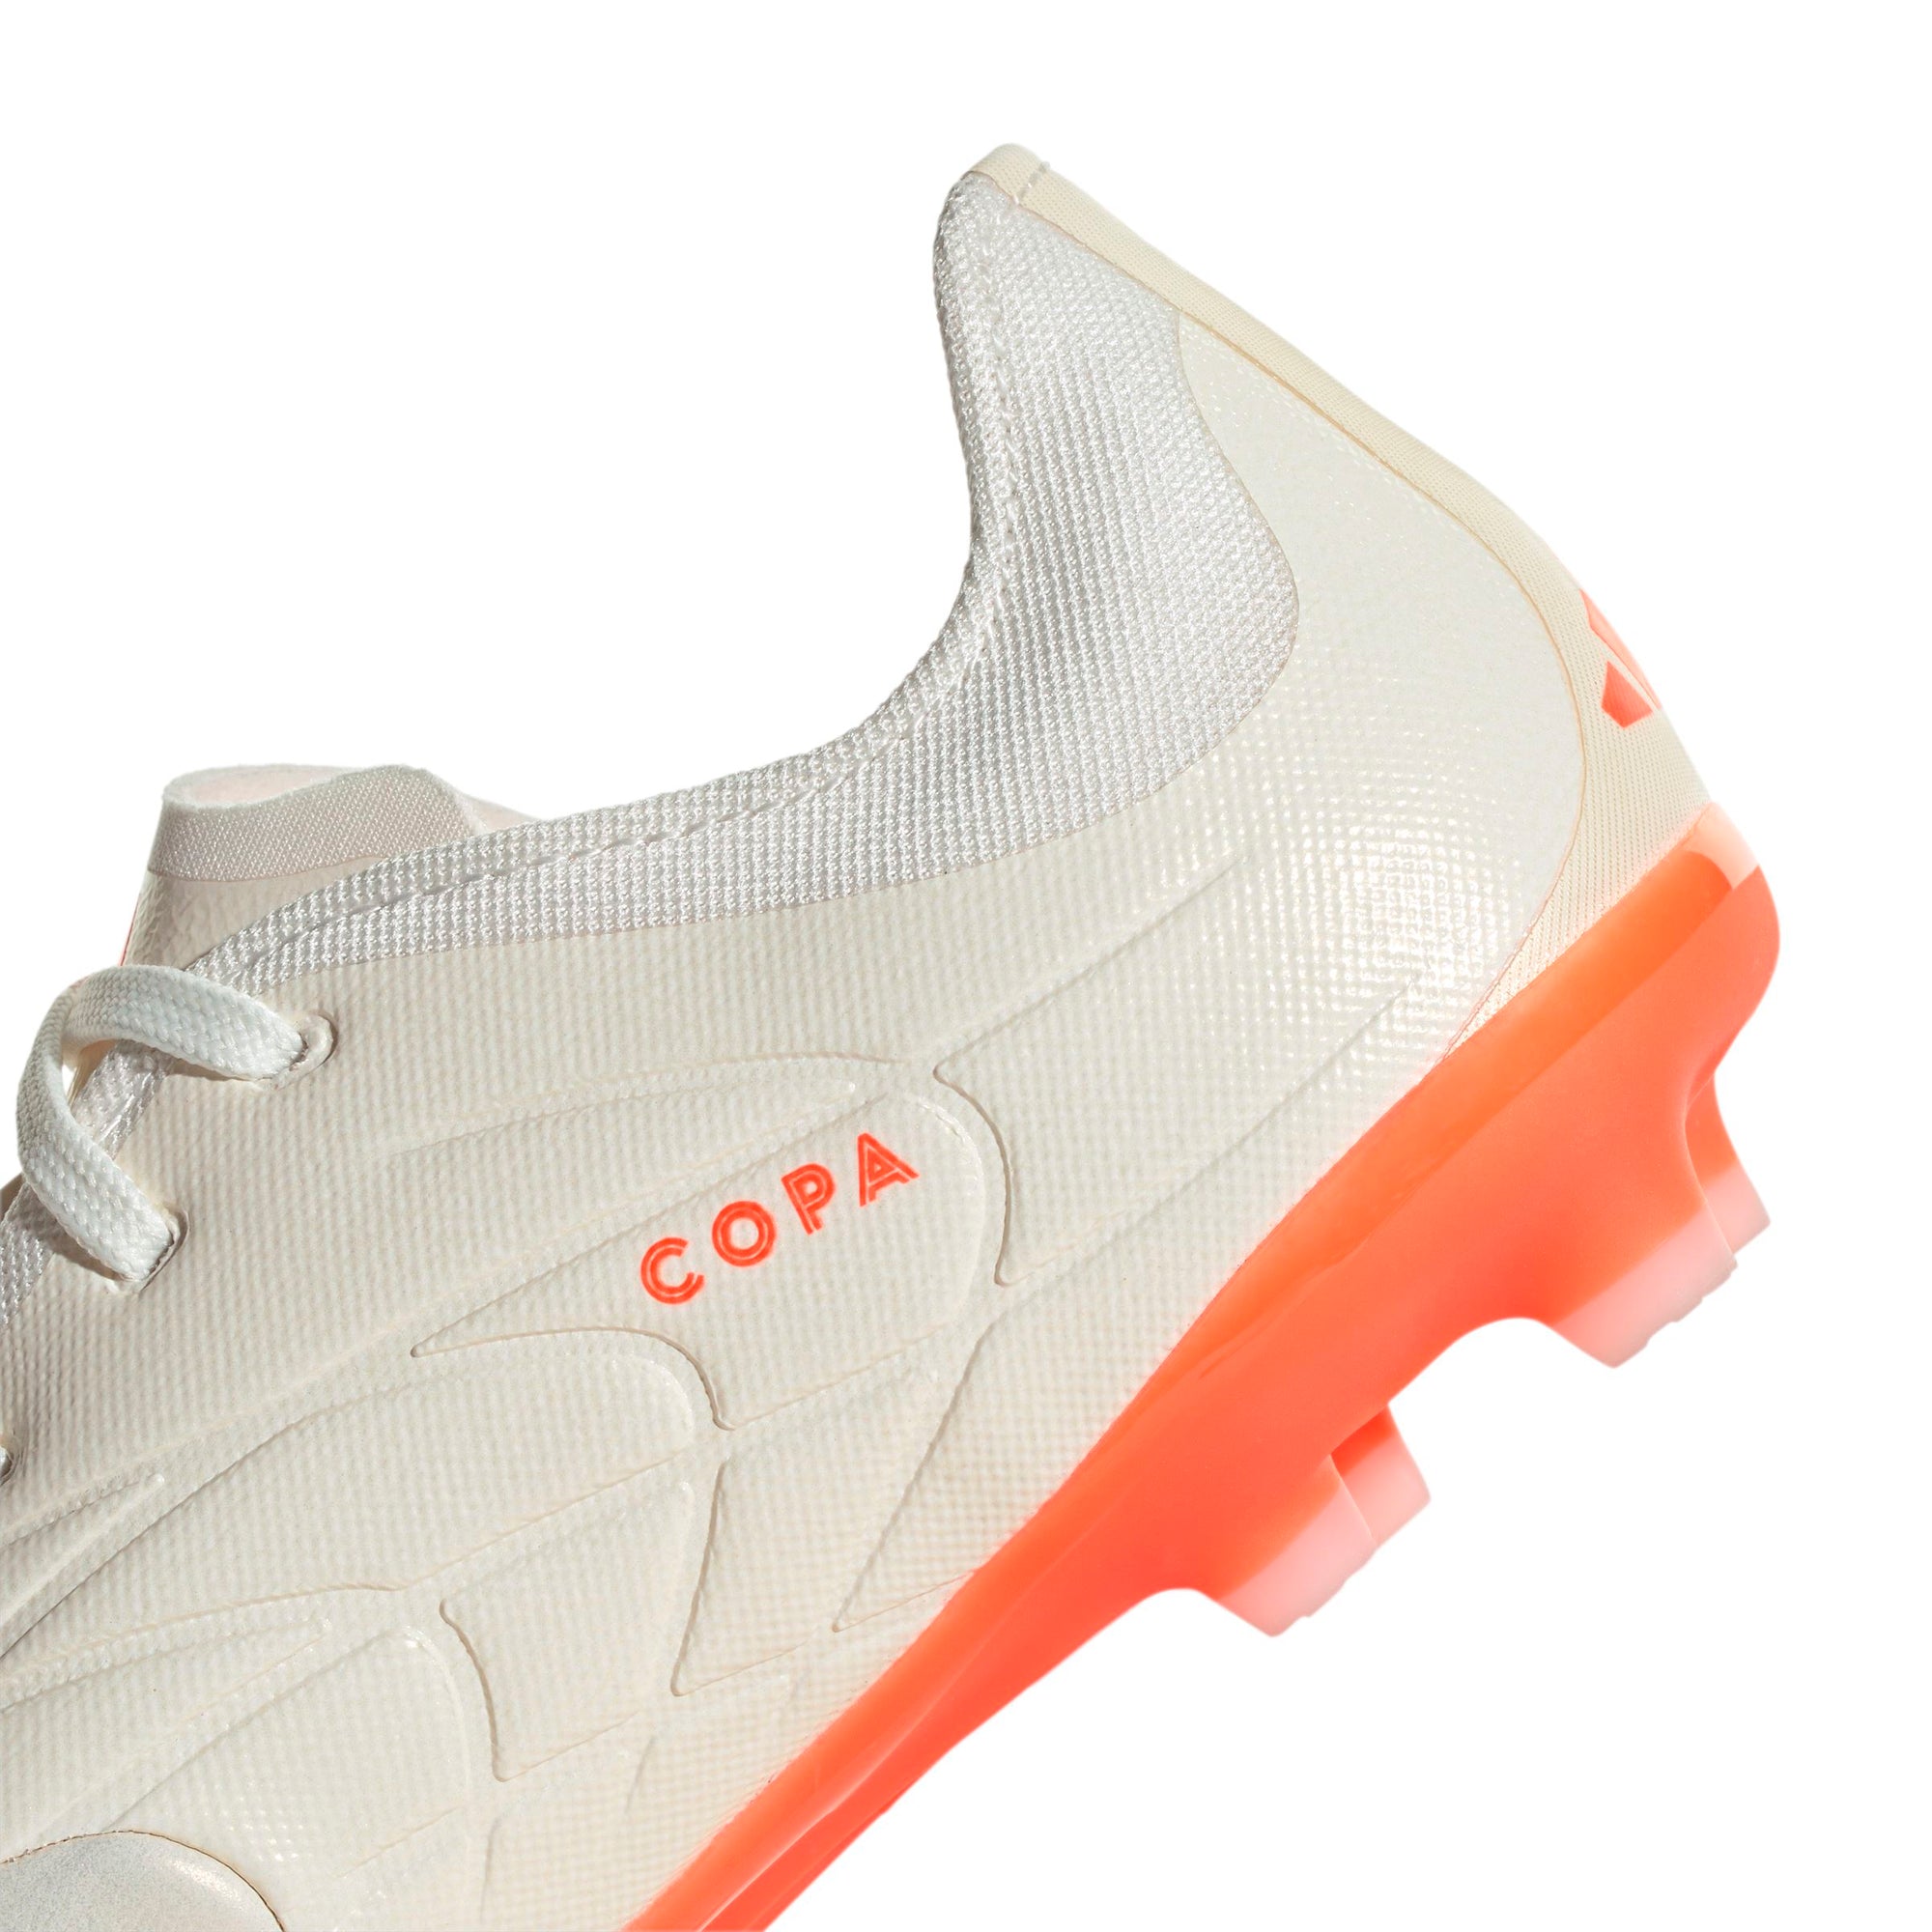 adidas Youth Copa Pure.1 FG Soccer Cleats | HQ8888 Cleats Adidas 